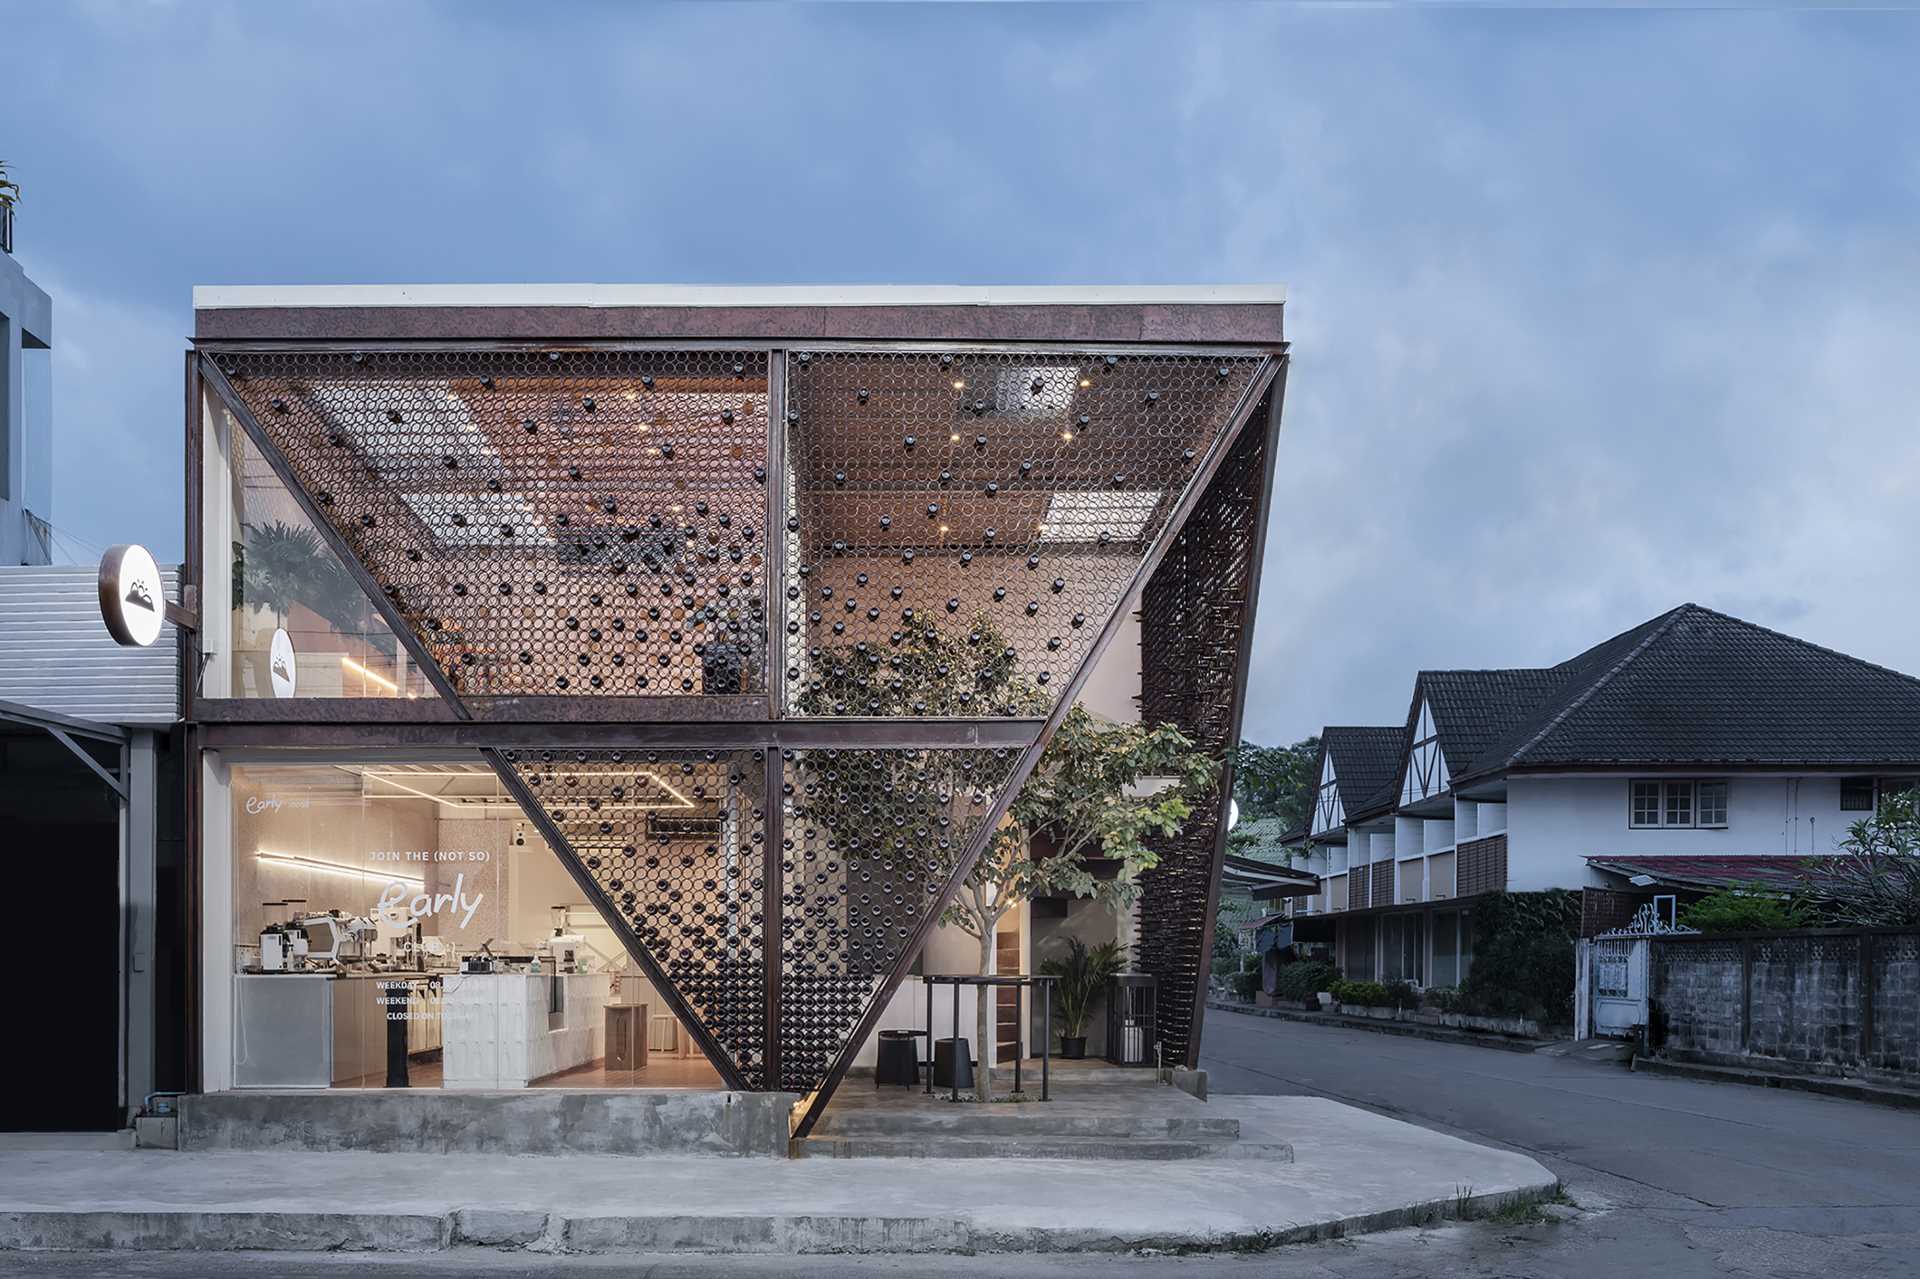 A modern cafe with a facade that features metal rings that hold recycled beer bottles.